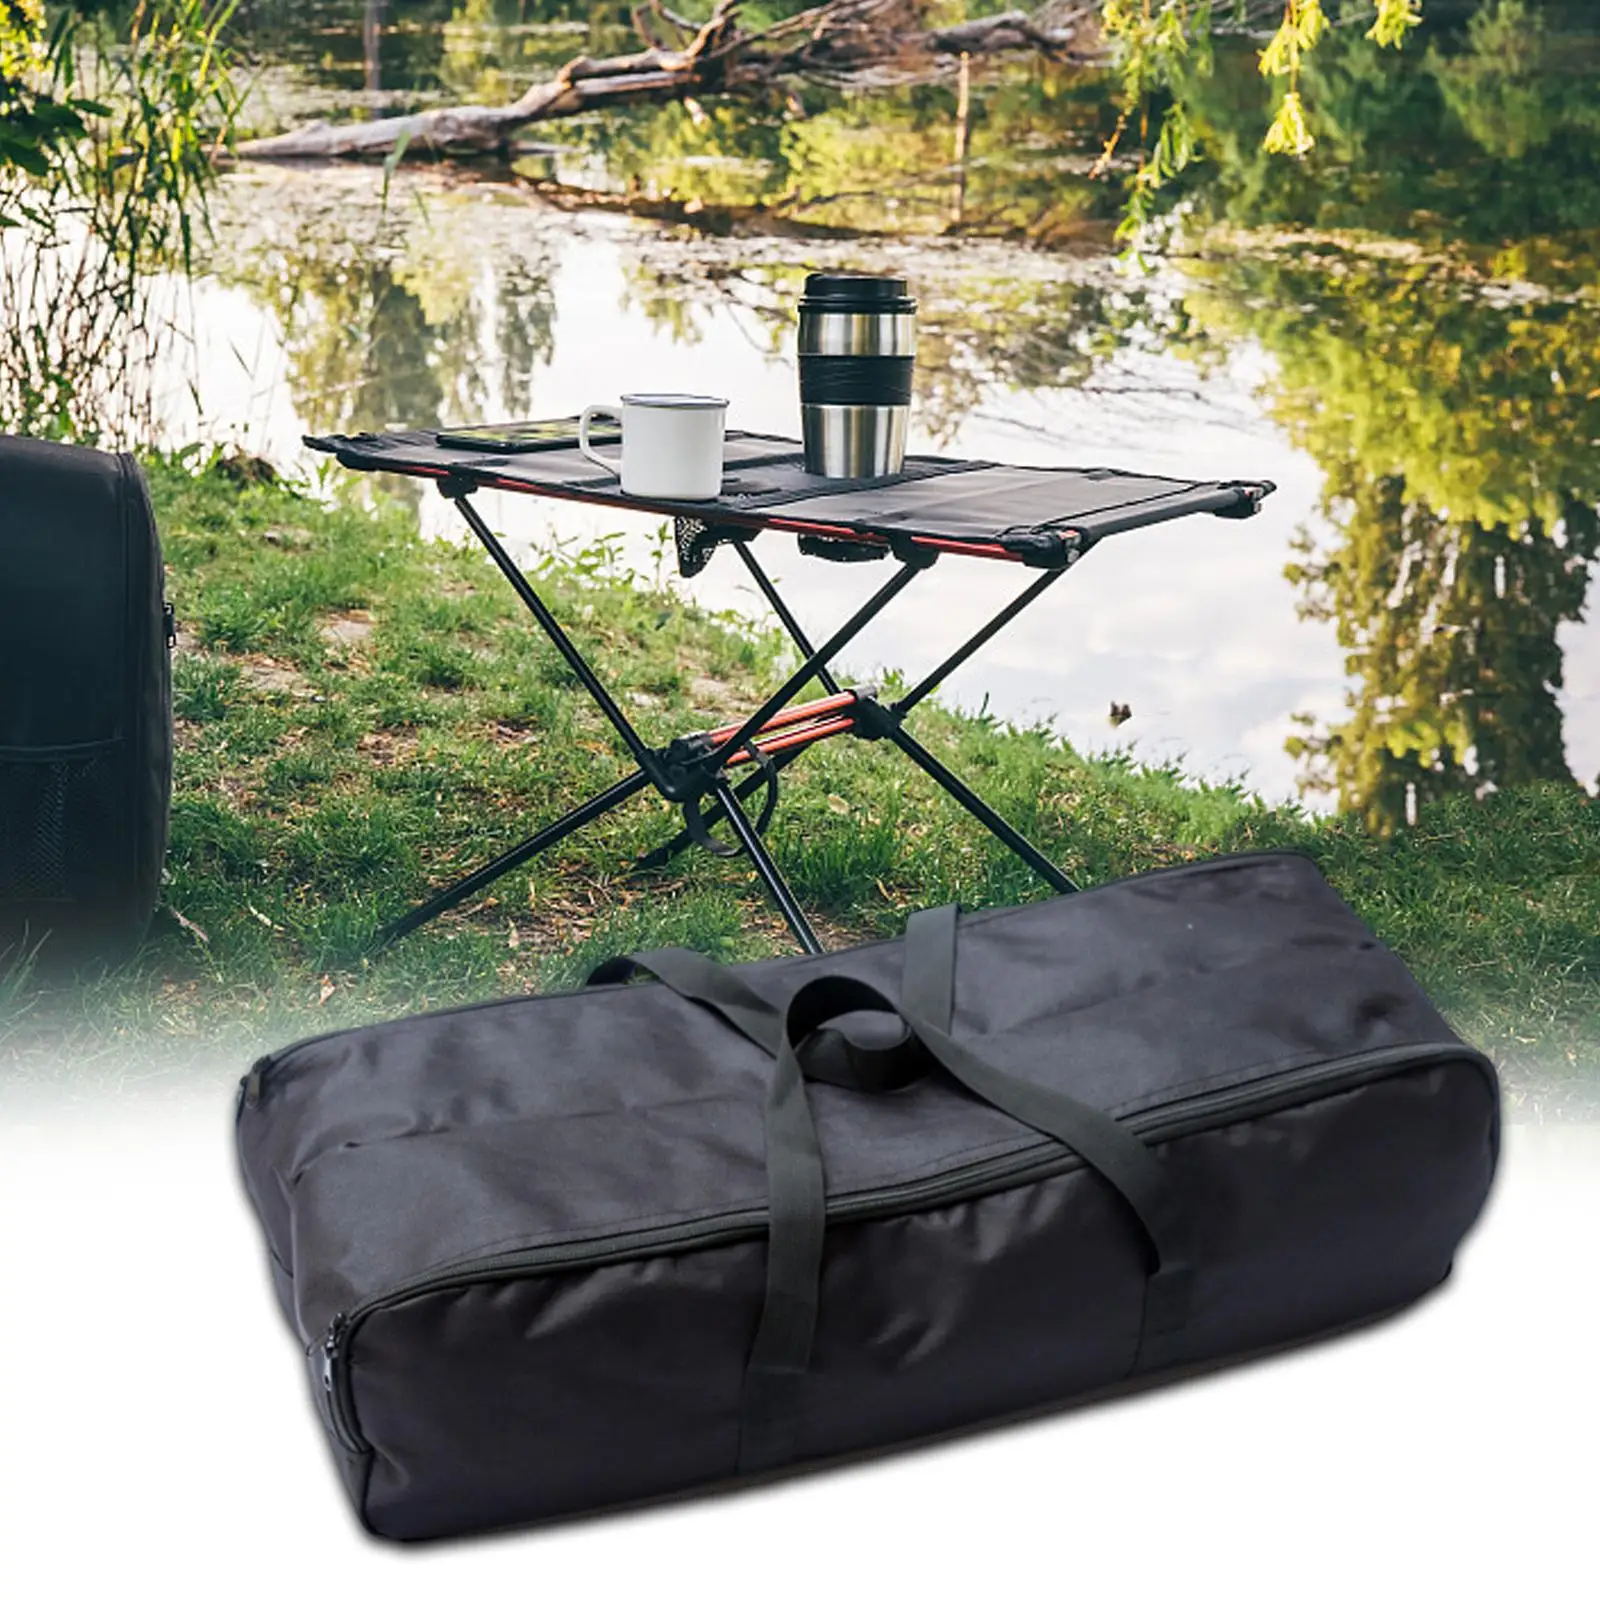 Hiking Folding Chair Storage Bag Oxford Cloth Durable Outdoor Carrying Bag